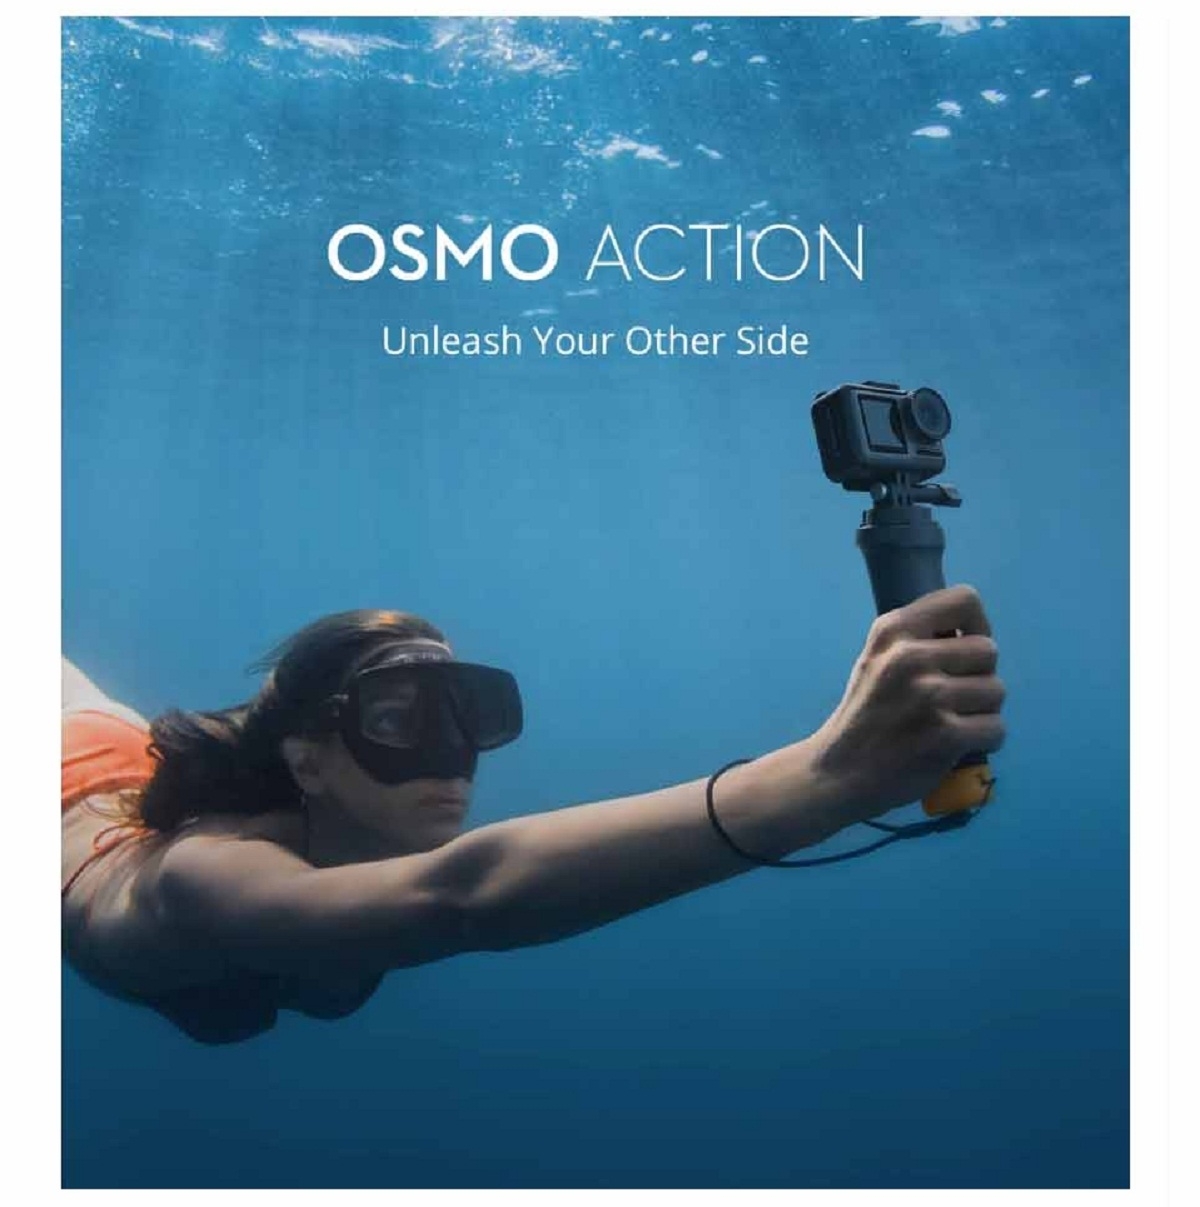 osmo action